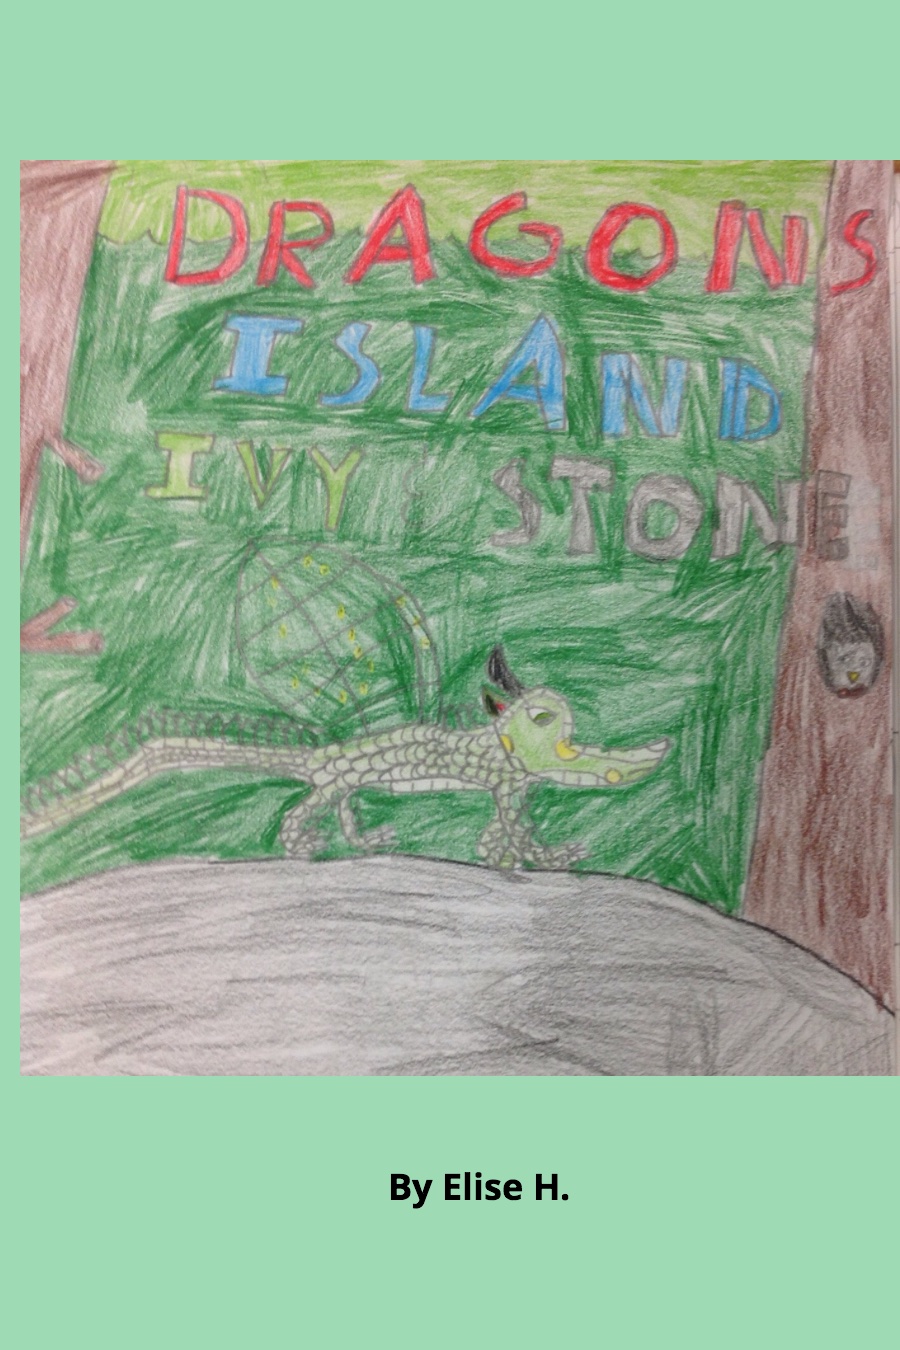 Dragons Island: Ivy and Stone by Elise H